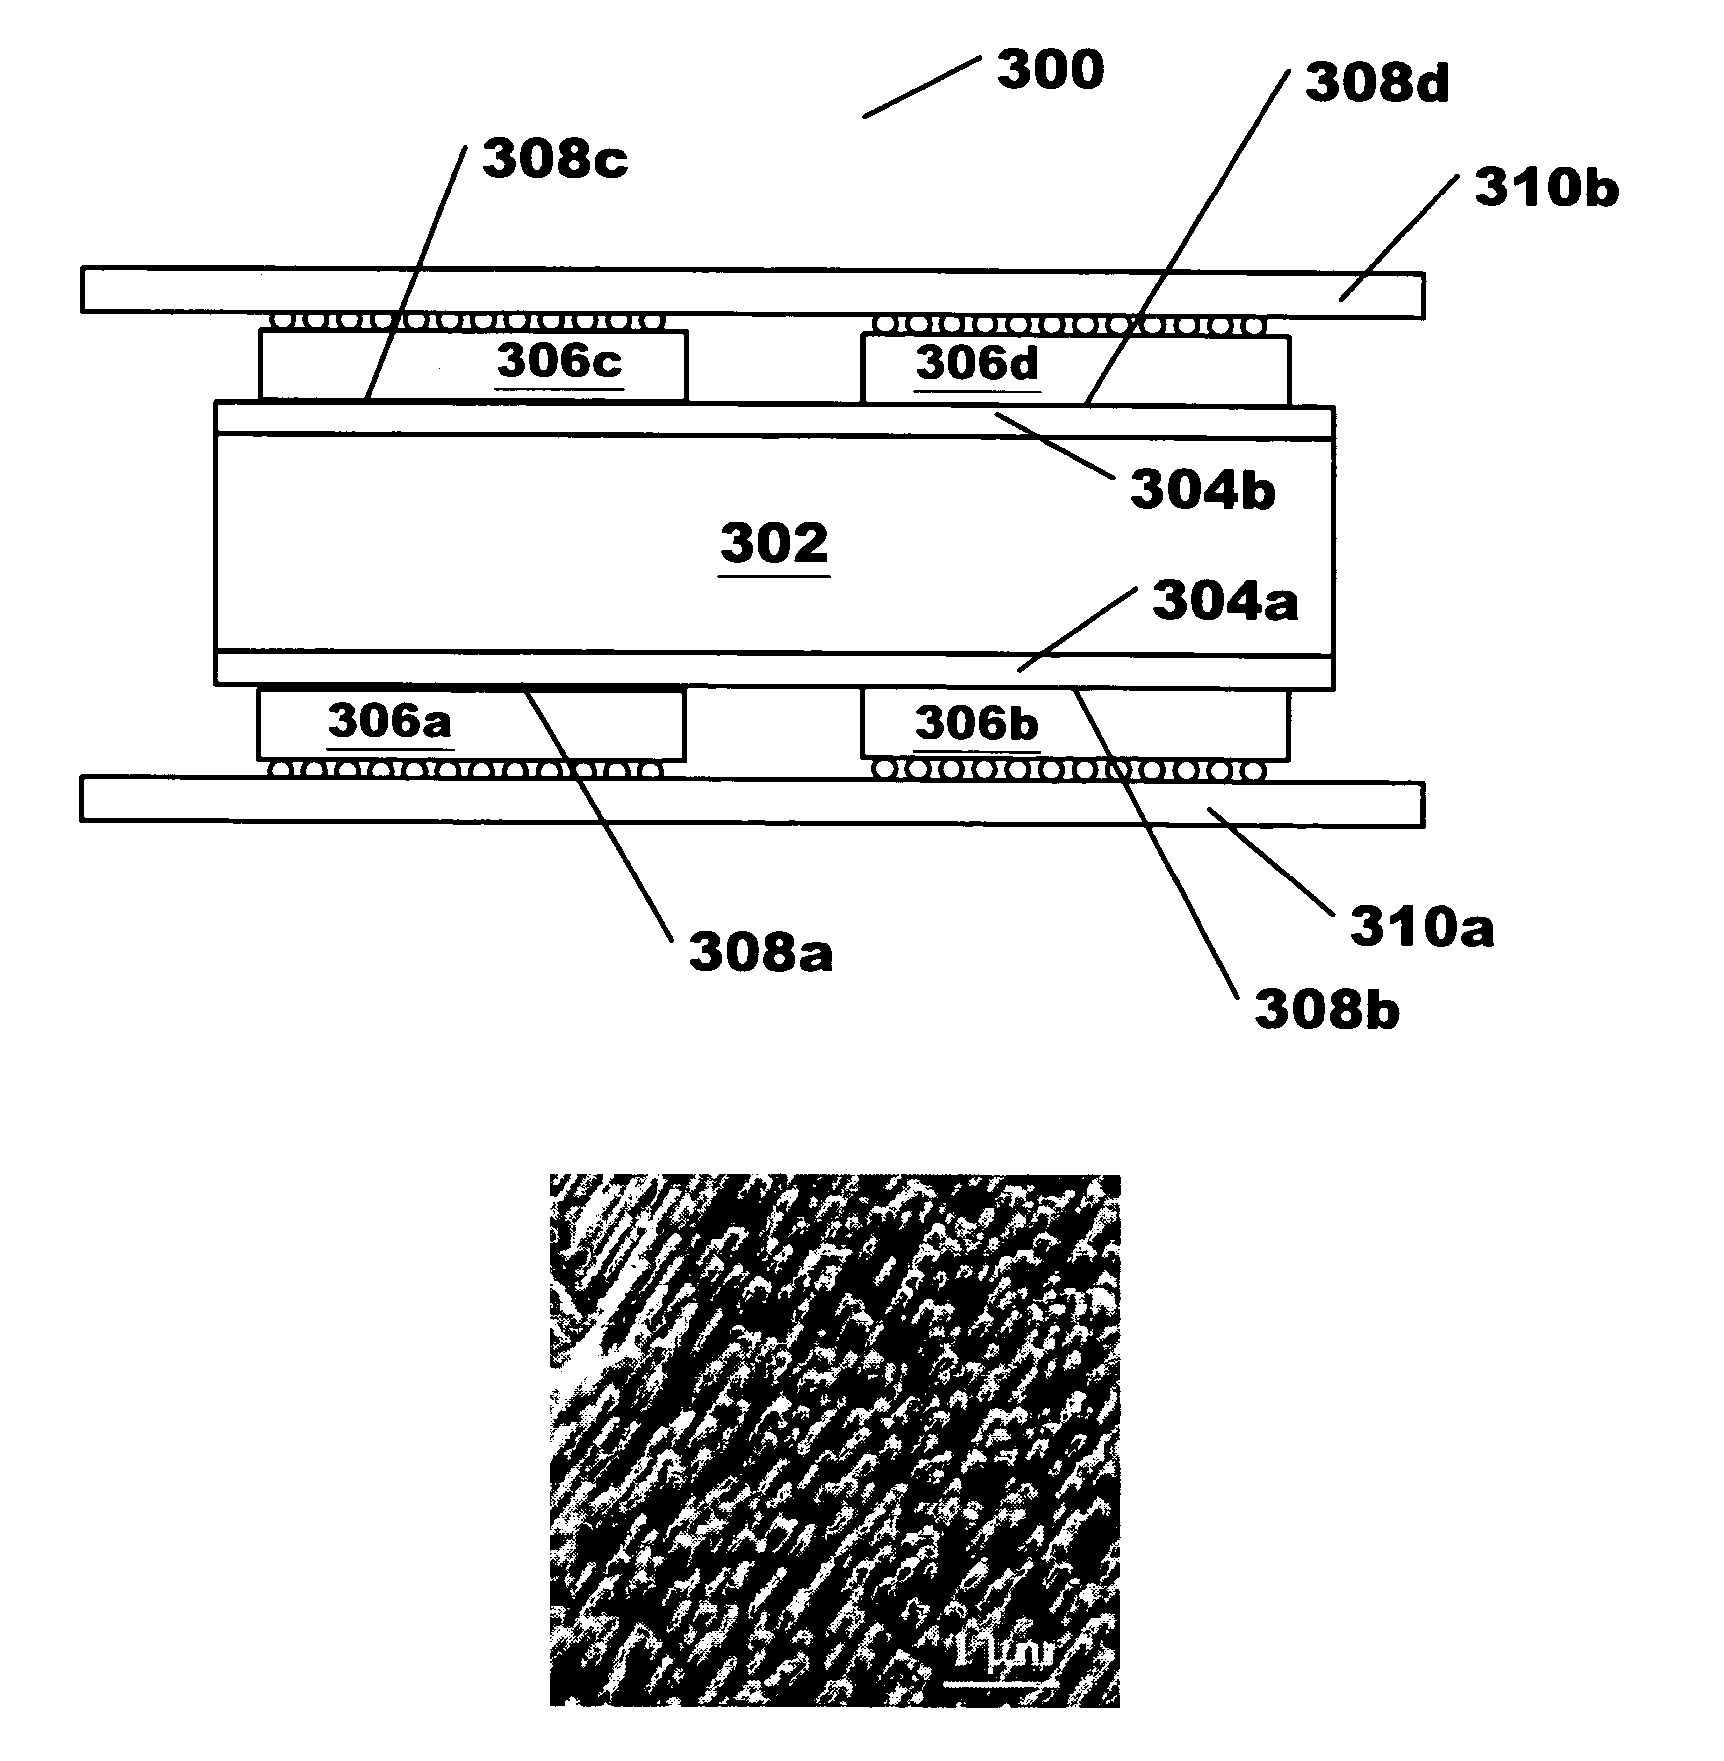 System and method using self-assembled nano structures in the design and fabrication of an integrated circuit micro-cooler